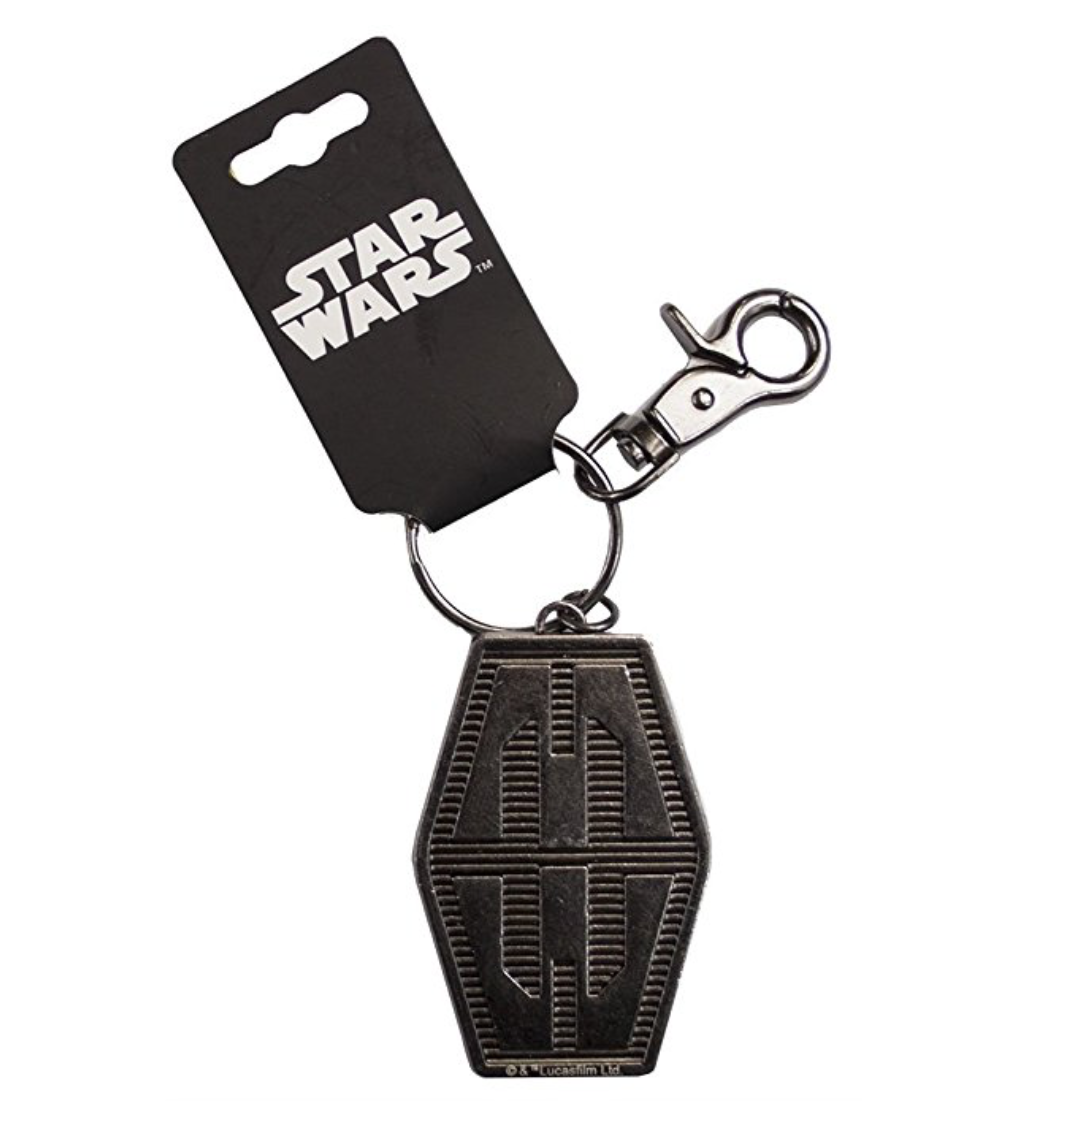 Solo: ASWS Scoundrels and Outlaws Keychain 2